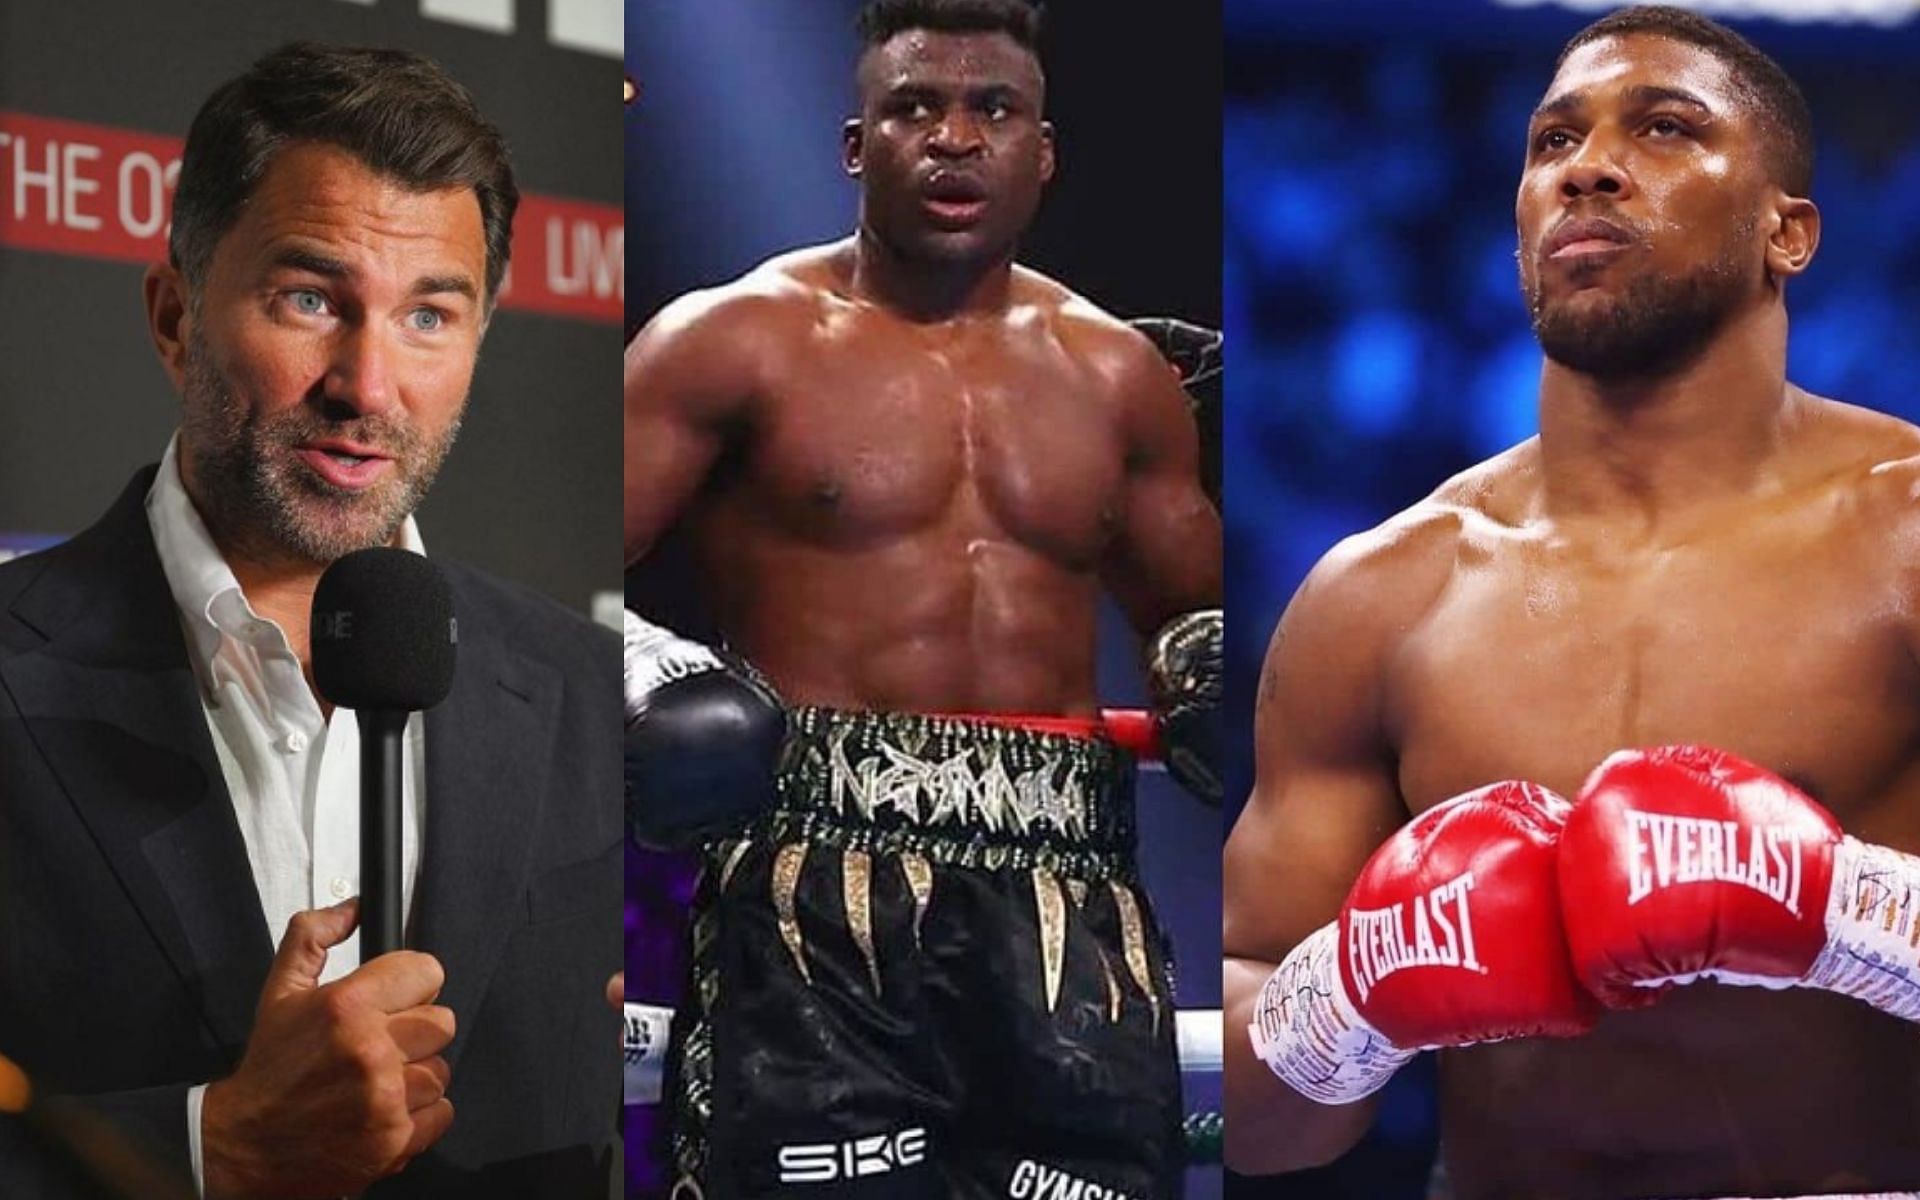 Eddie Hearn (left) explains why Francis Ngannou (middle) is a dangerous opponent for Anthony Joshua (right) [Images Courtesy: @eddiehearn and @francisngannou on Instagram]